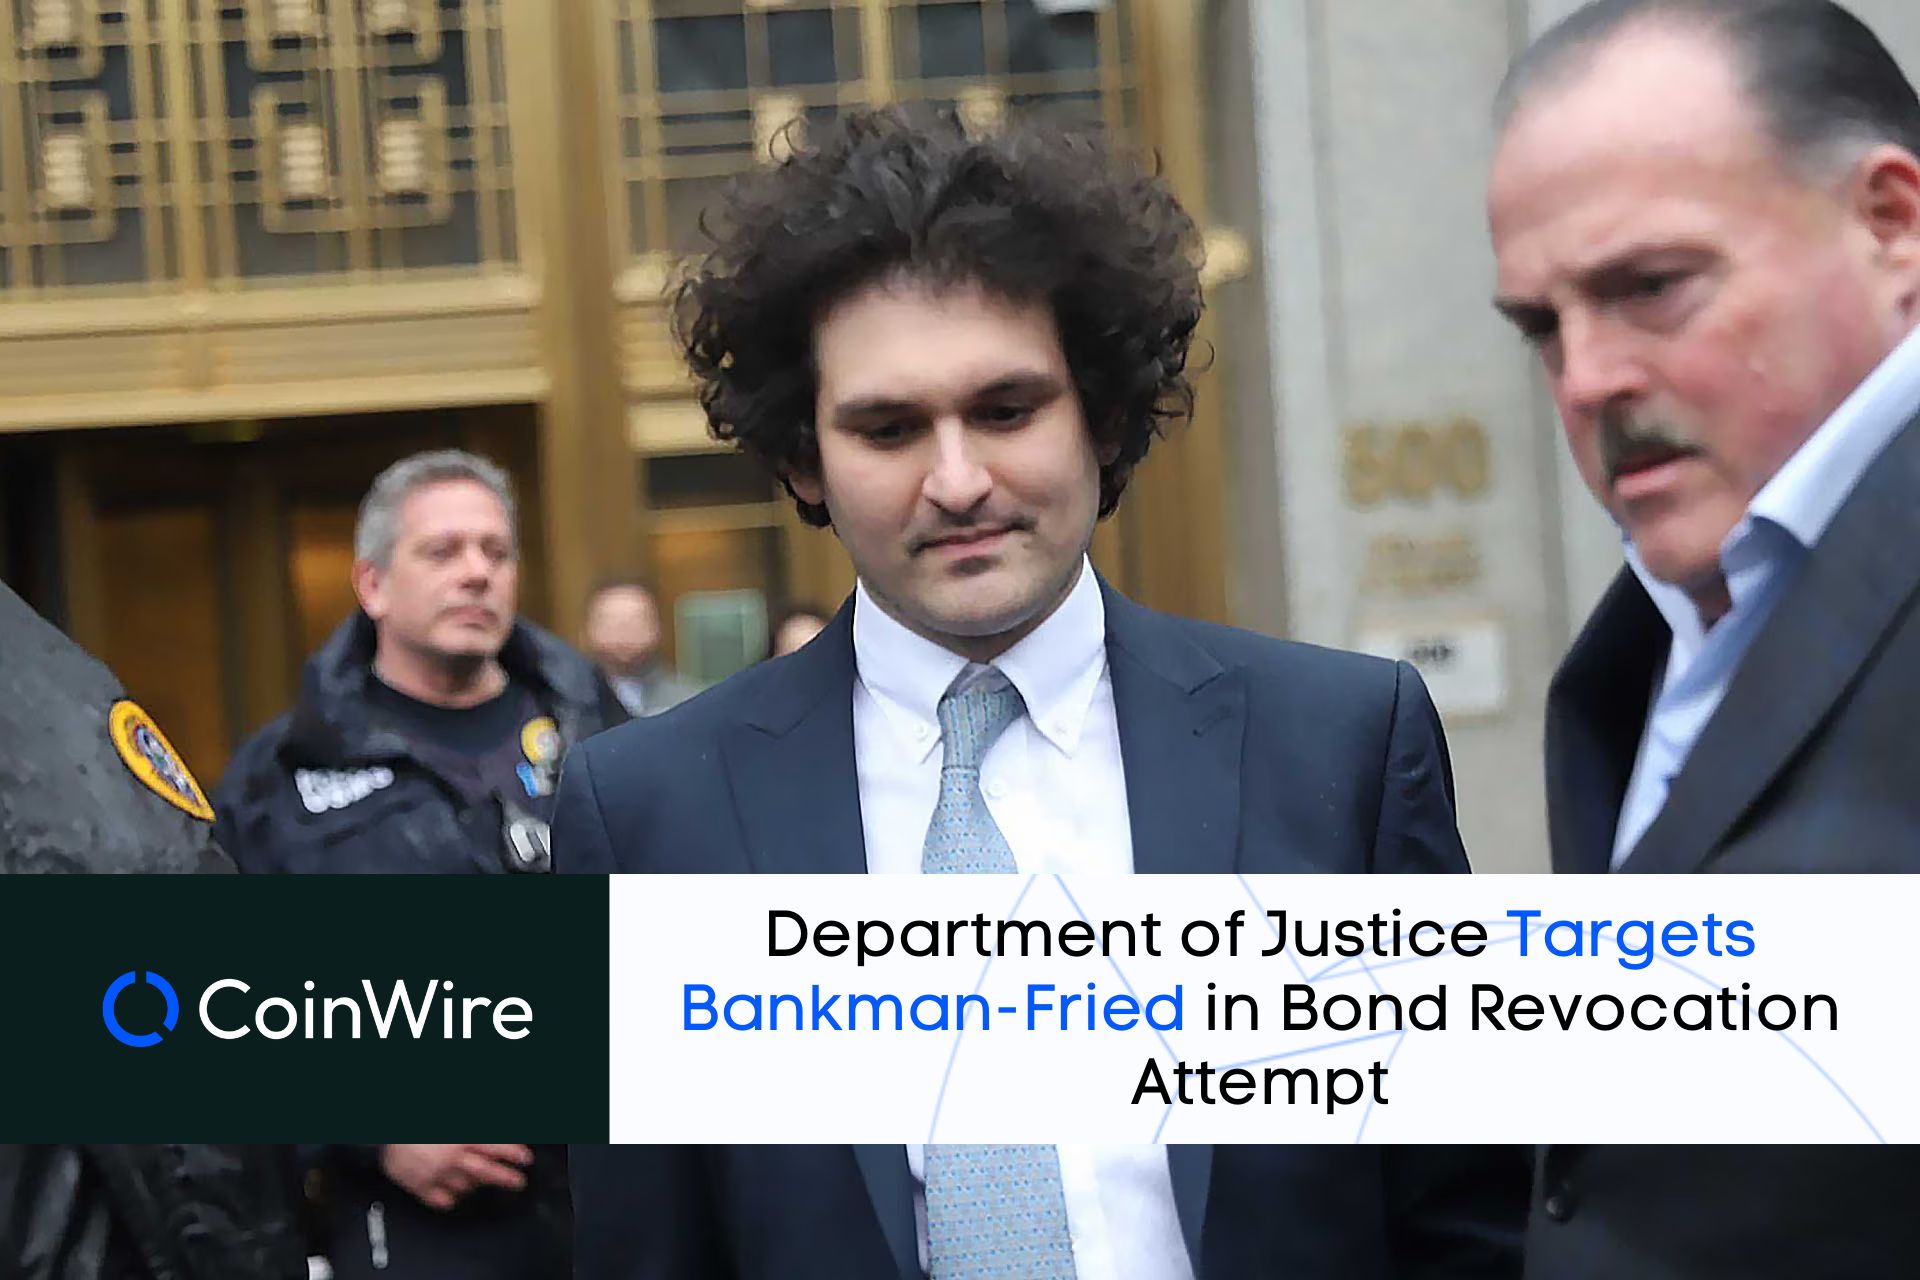 Department Of Justice Targets Bankman-Fried In Bond Revocation Attempt